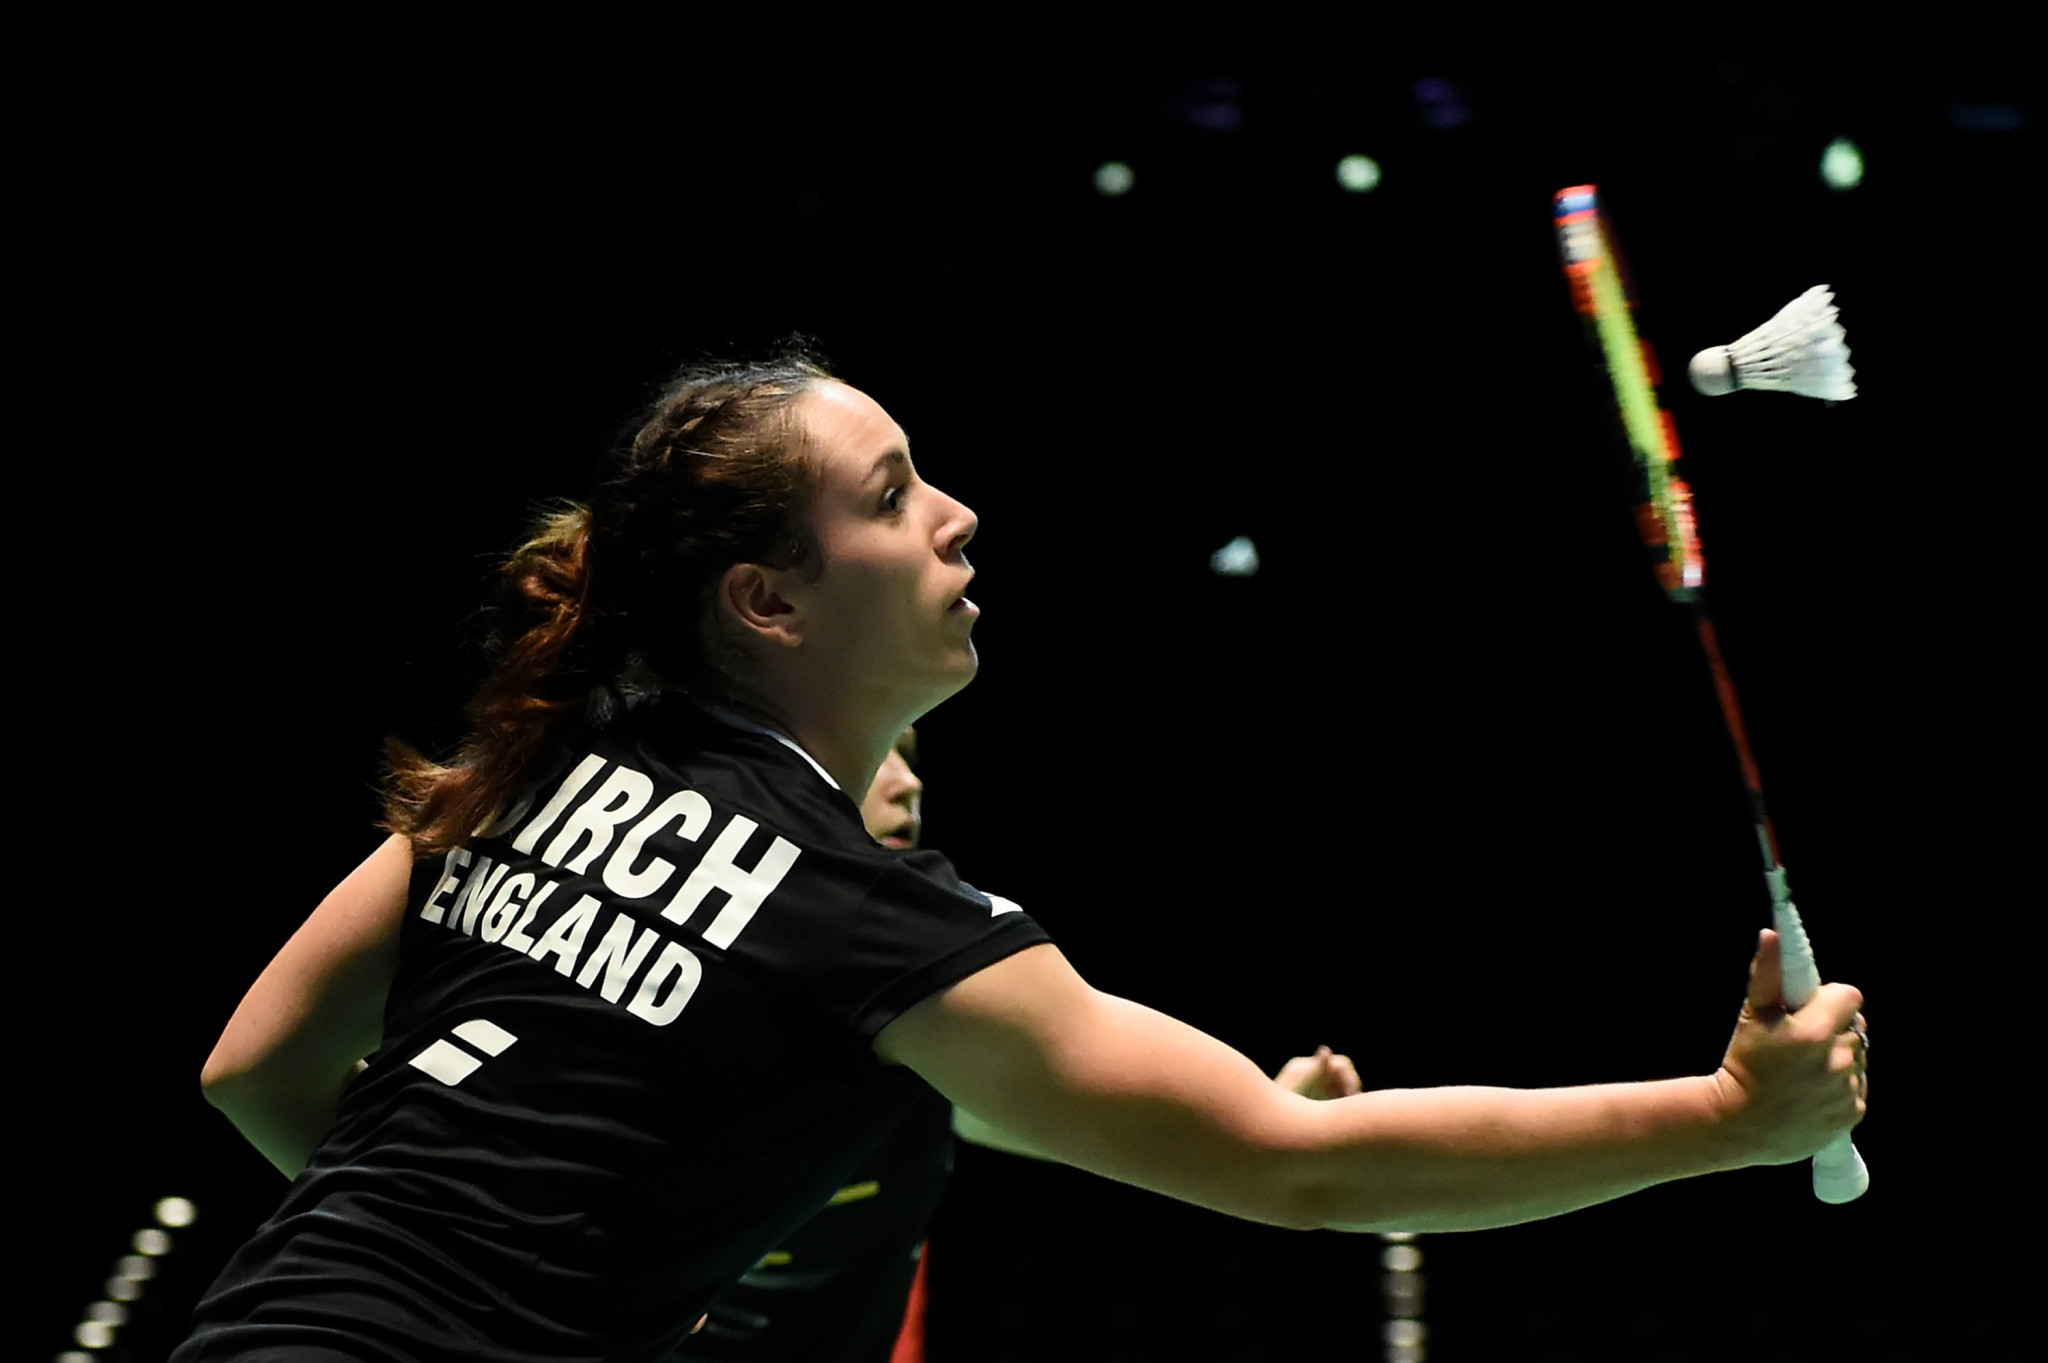 England to host Badminton European Mixed Team Championships in 2021